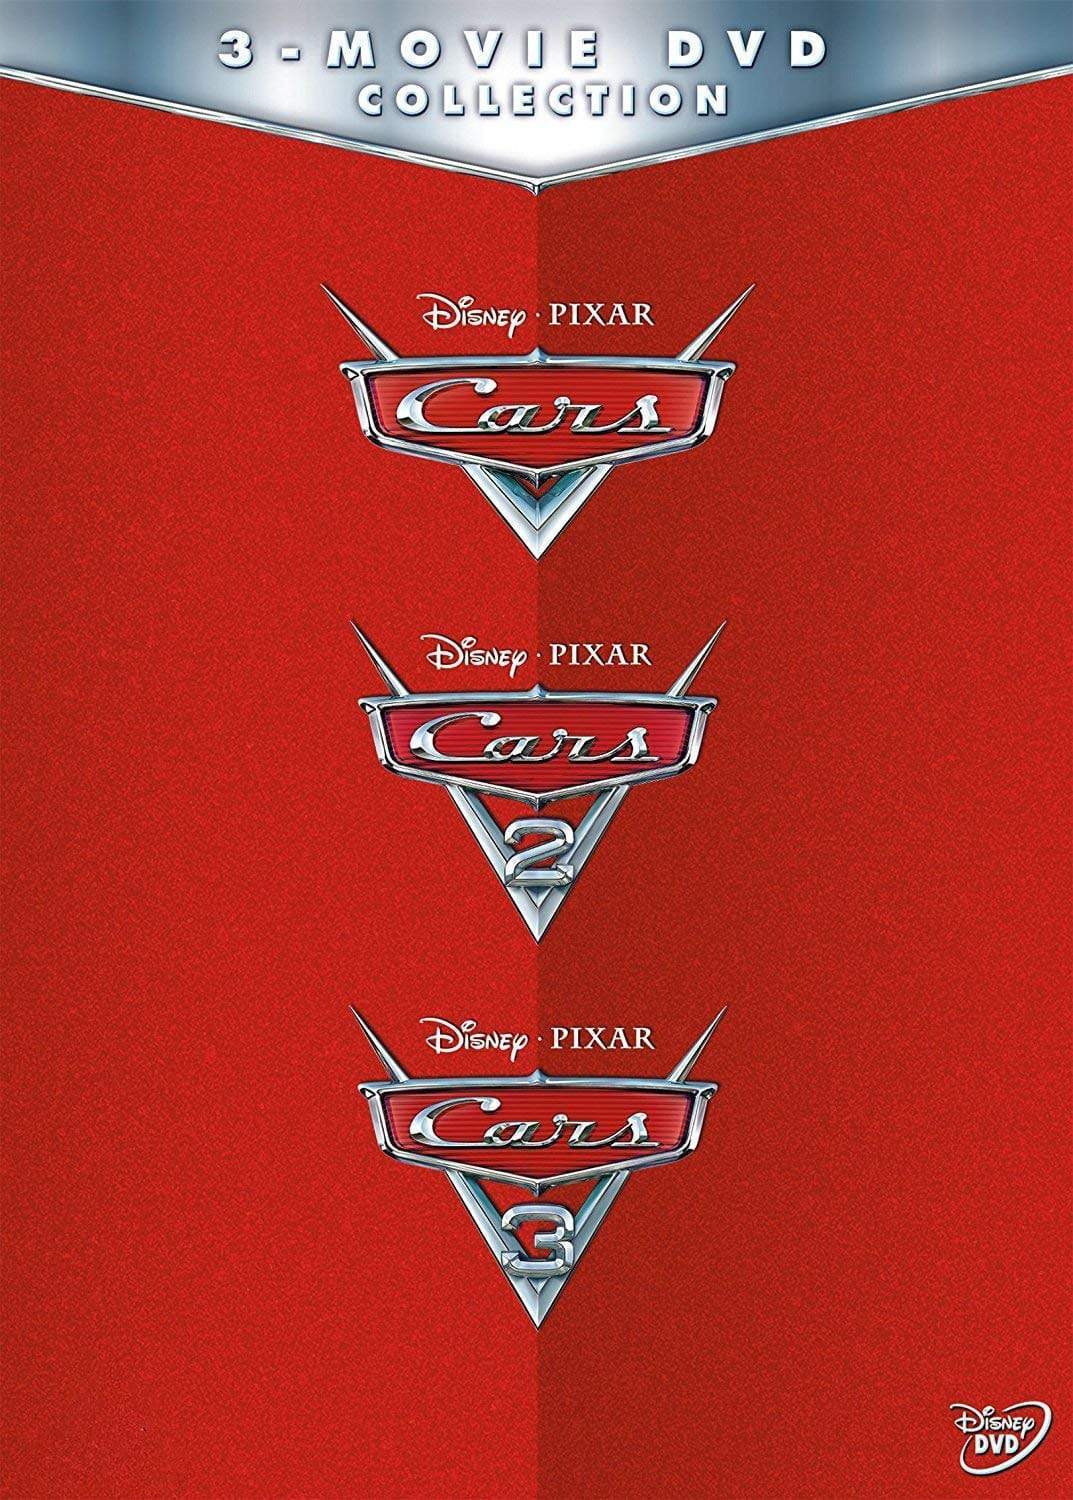 Disney's Cars Trilogy DVD Set Includes All 3 Movies – Pristine Sales